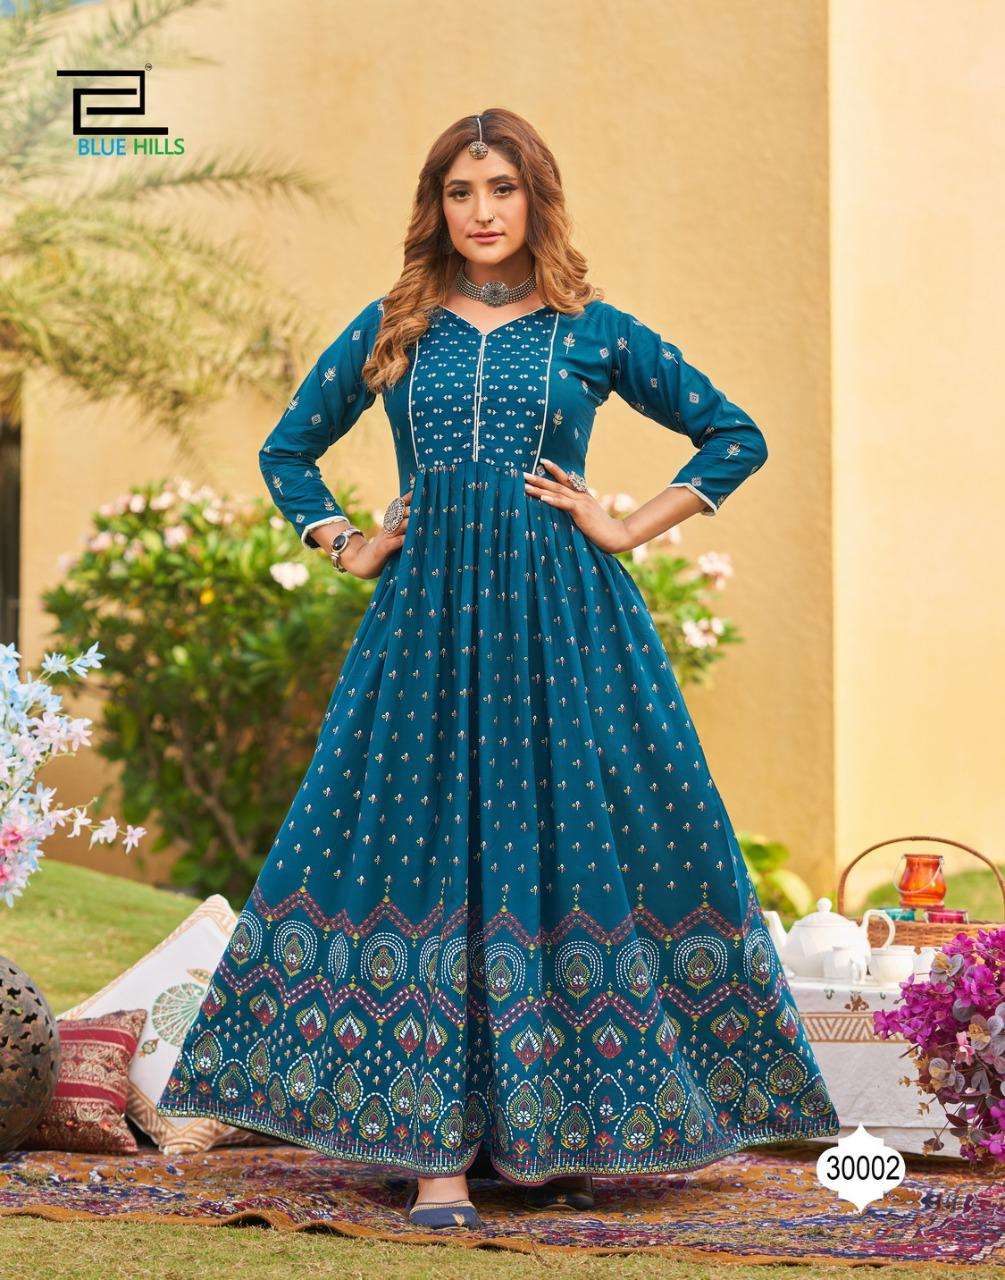 bluehills walkway vol 30 rayon ling gown collection wholesale price surat